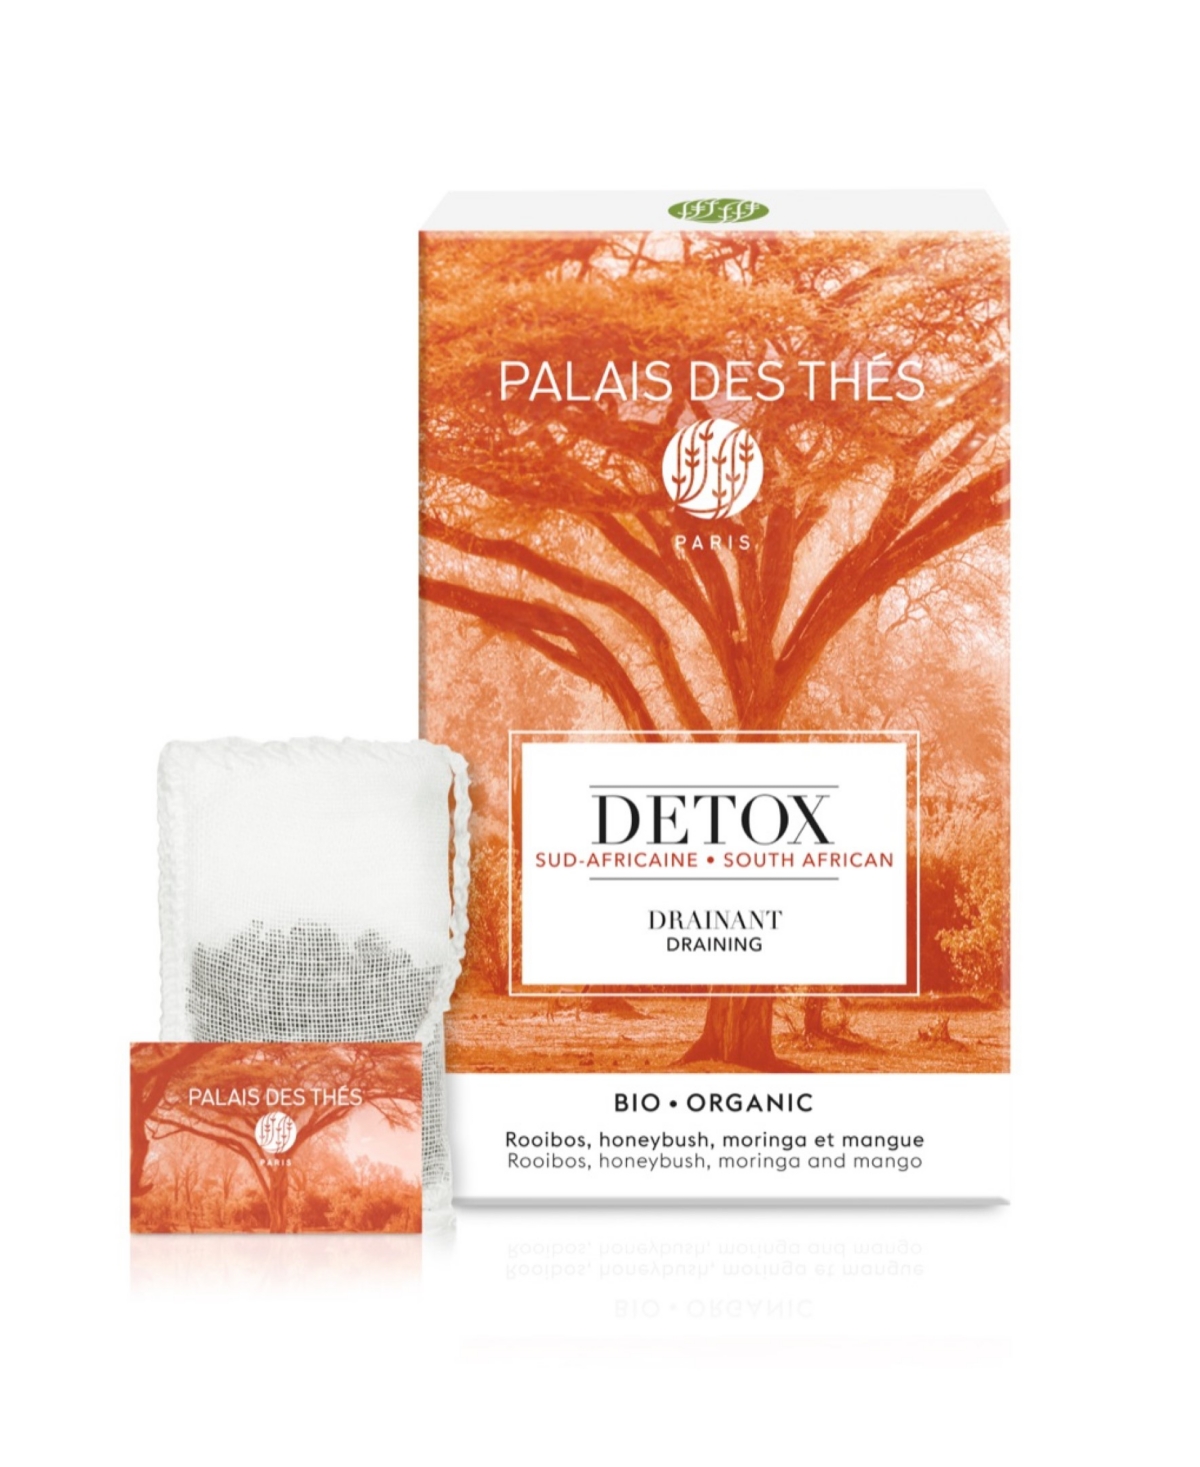 Palais Des Thes South African Detox Draining Box, Pack Of 20 Tea Bags In No Color